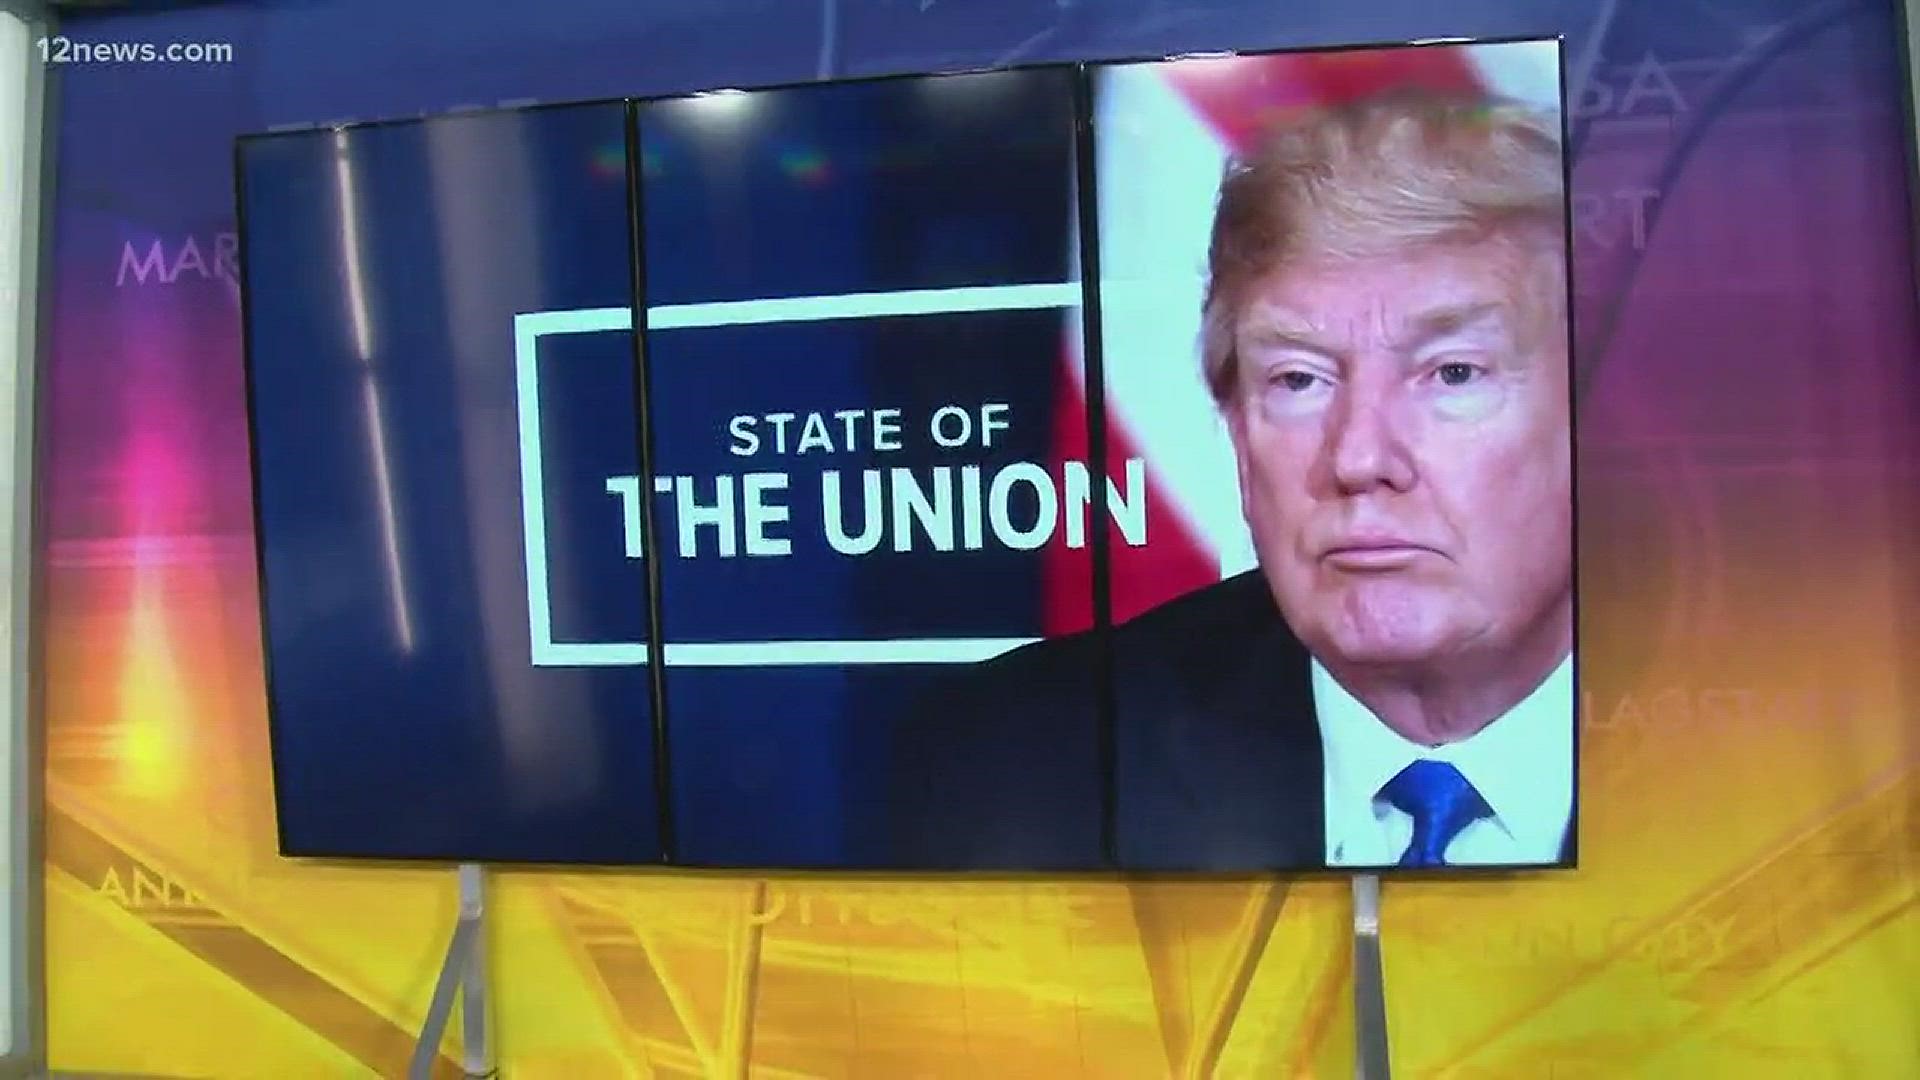 President Trump was in office less than six weeks when he addressed Congress. Ahead of his first State of the Union, we check how he's lived up to that speech.